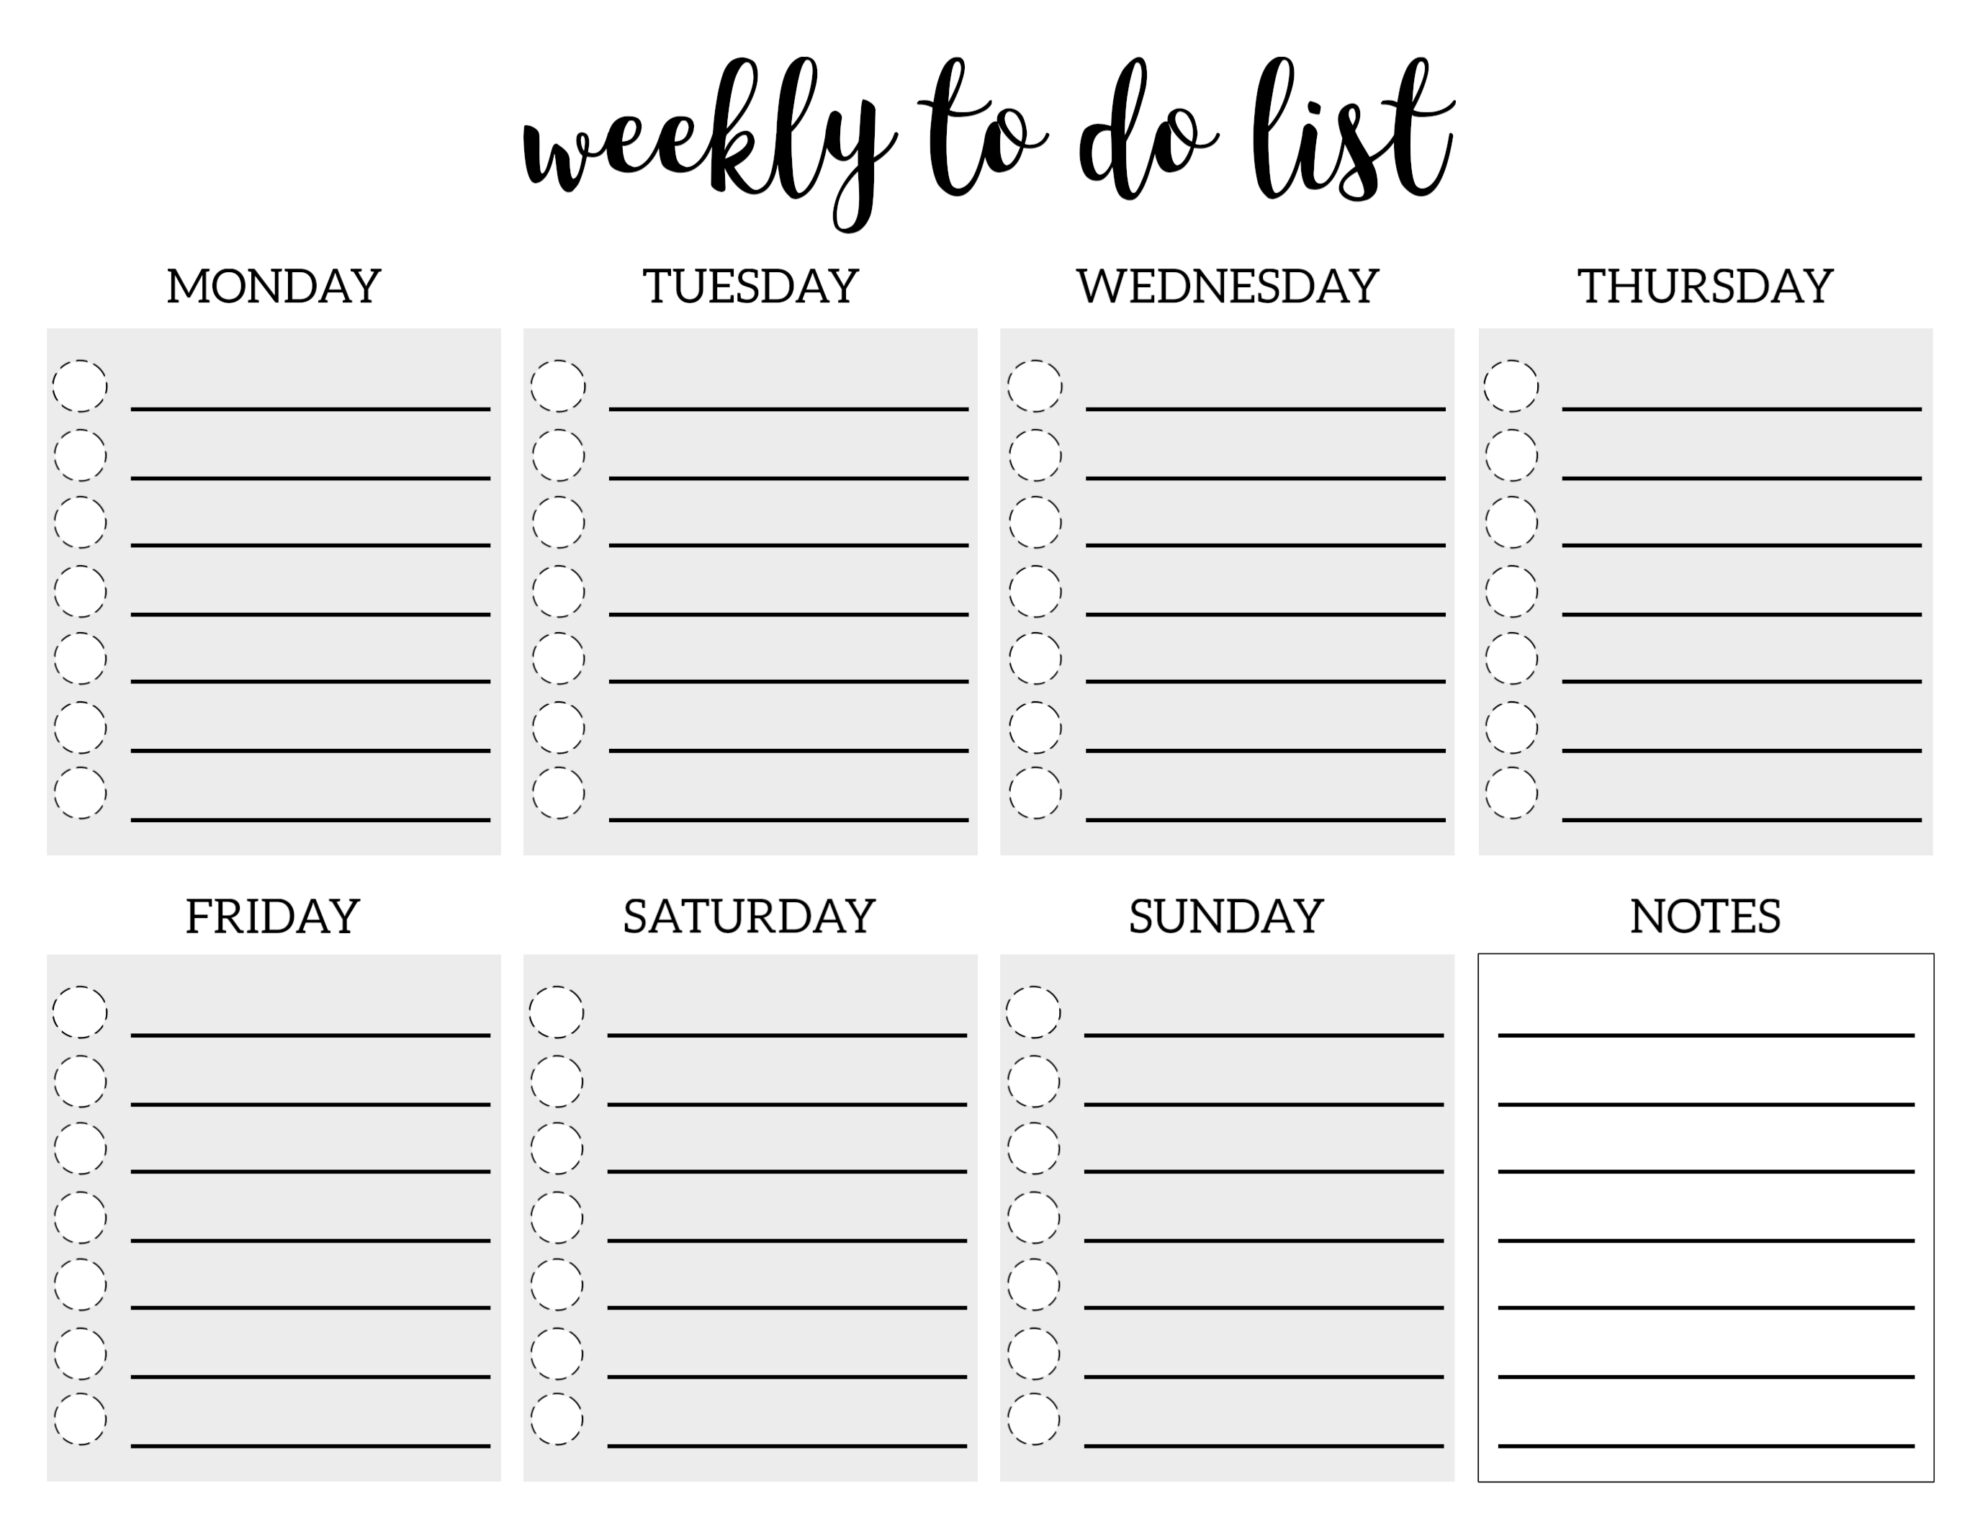 Weekly Work To Do List Template from www.papertraildesign.com